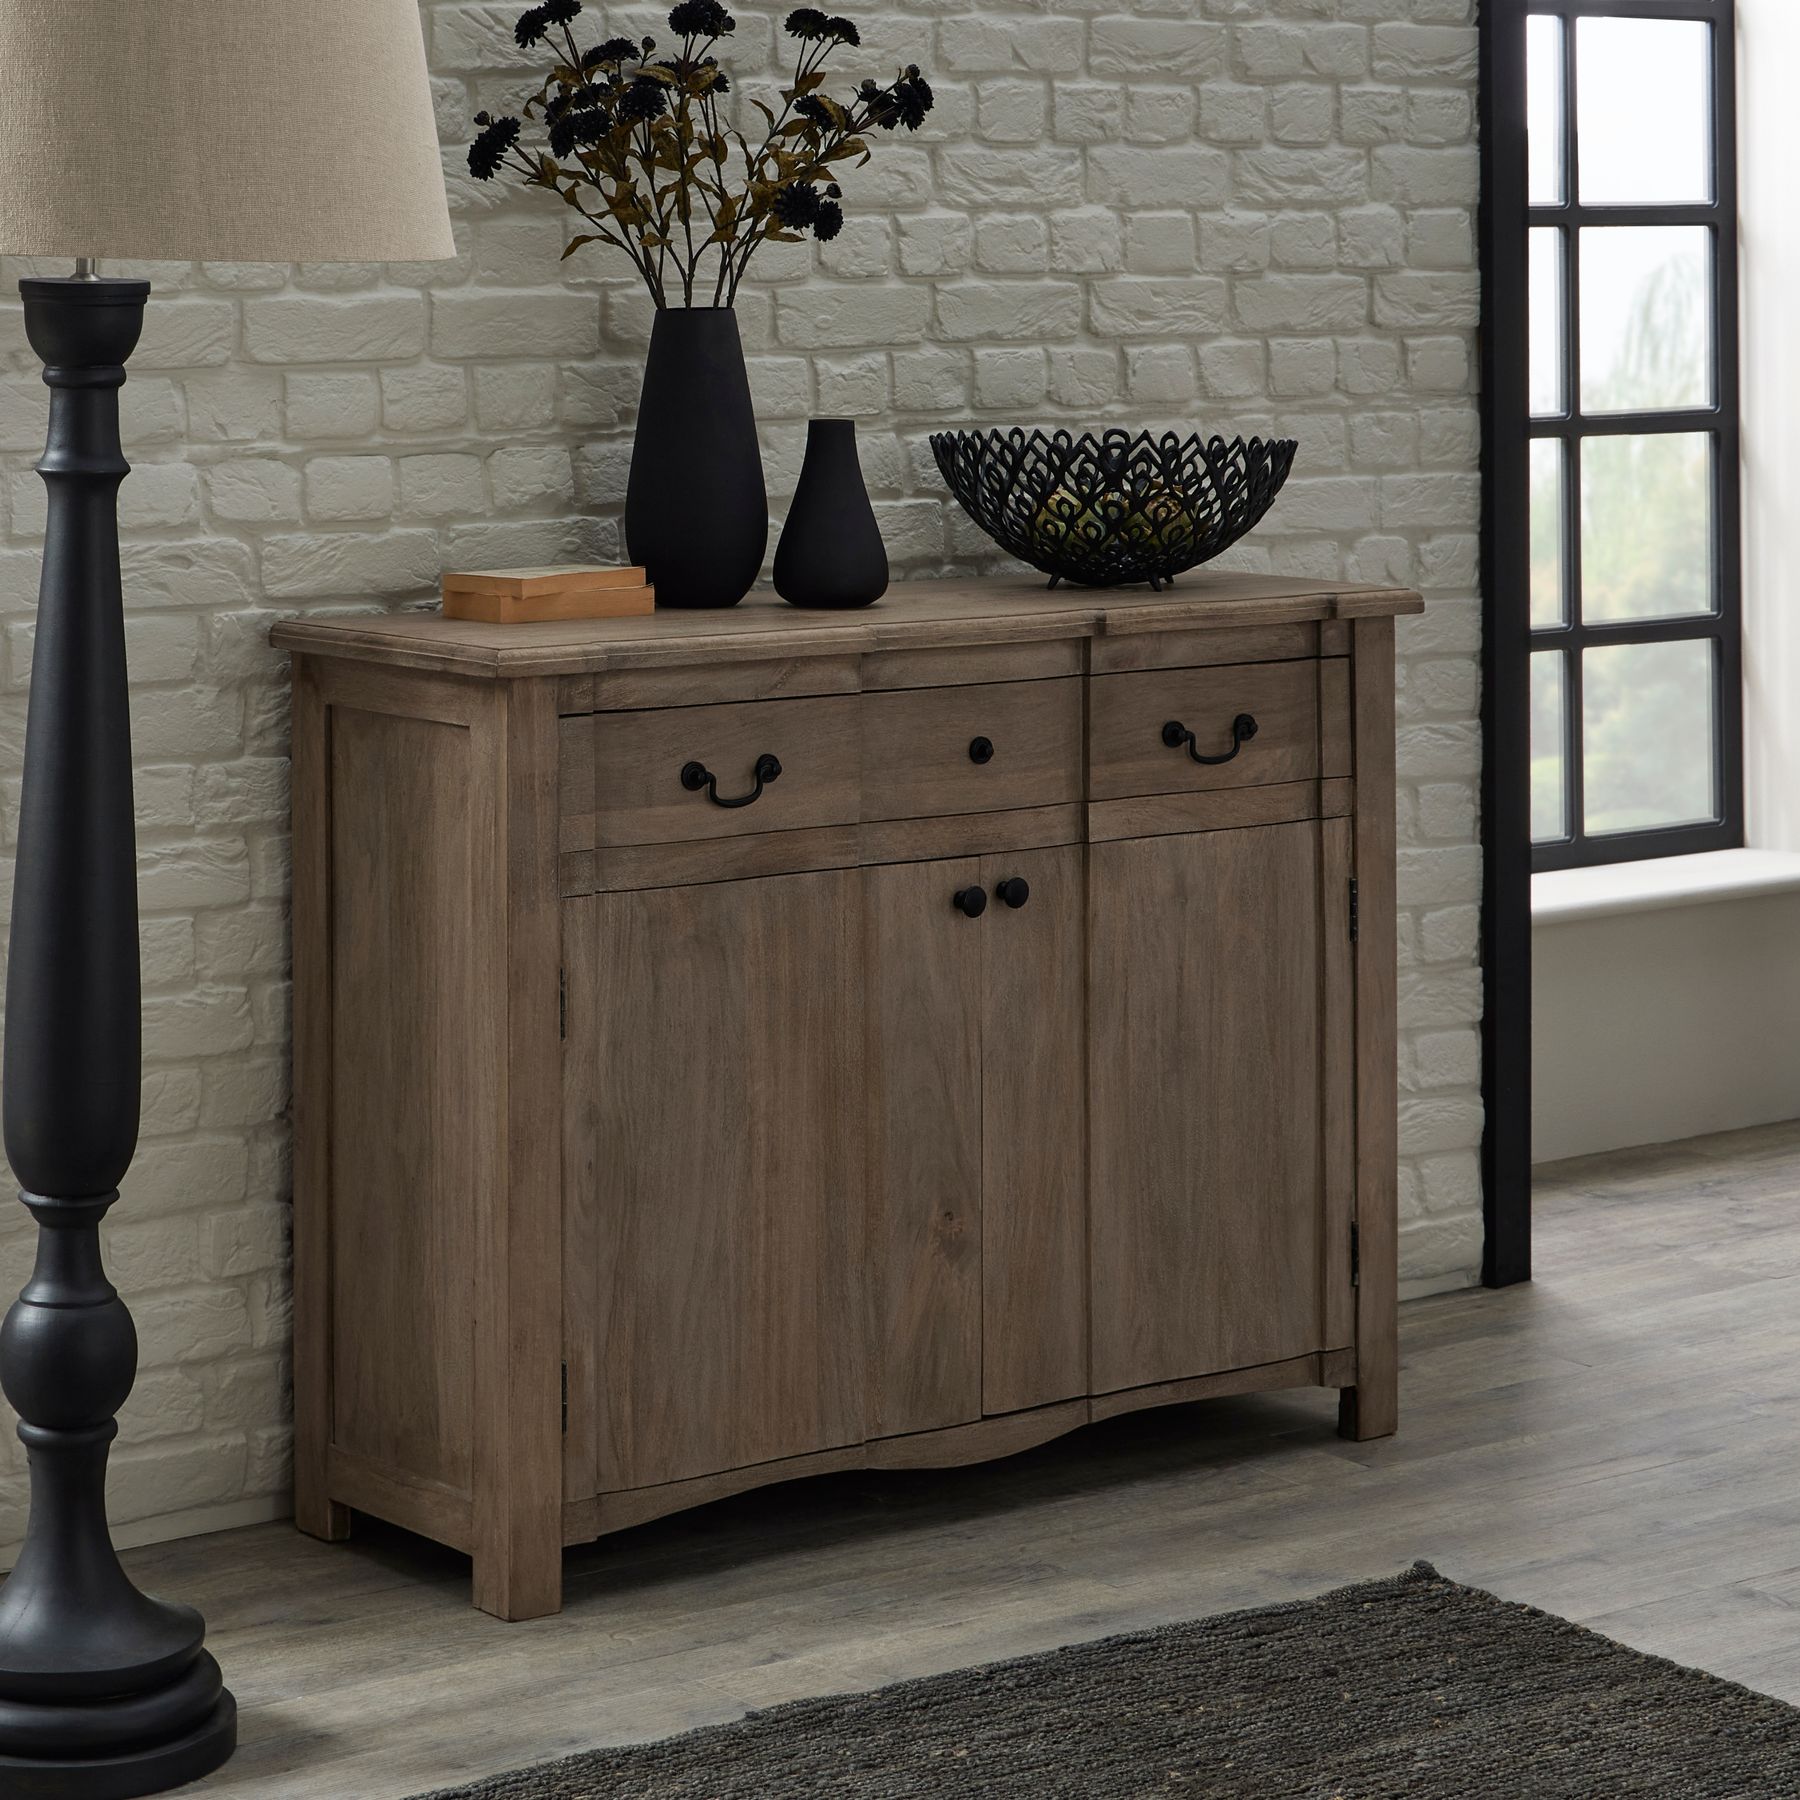 Copgrove Collection 1 Drawer 2 Door Sideboard - Image 6